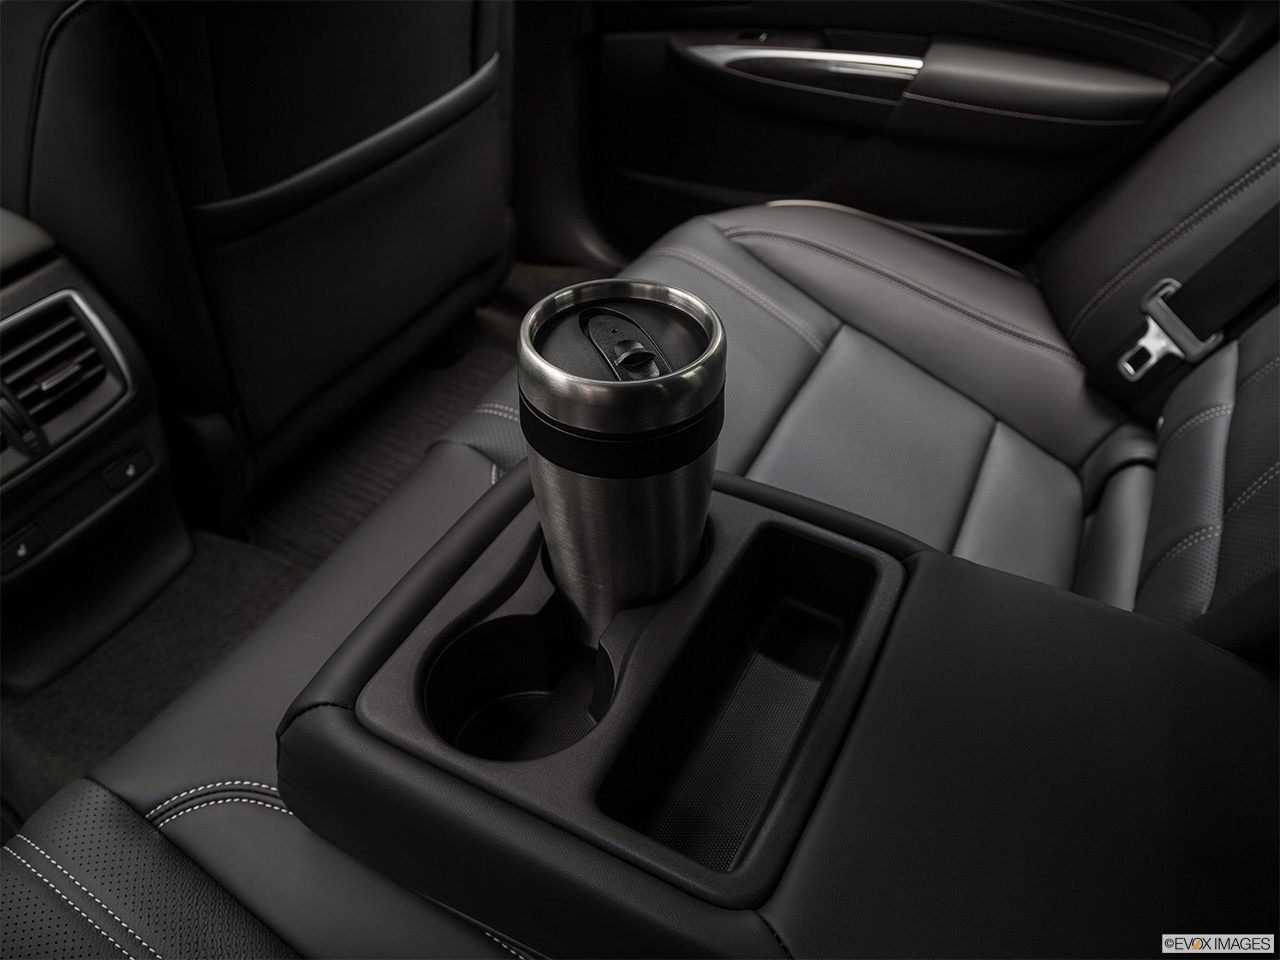 2018 Acura TLX 3.5L Cup holder prop (quaternary). 